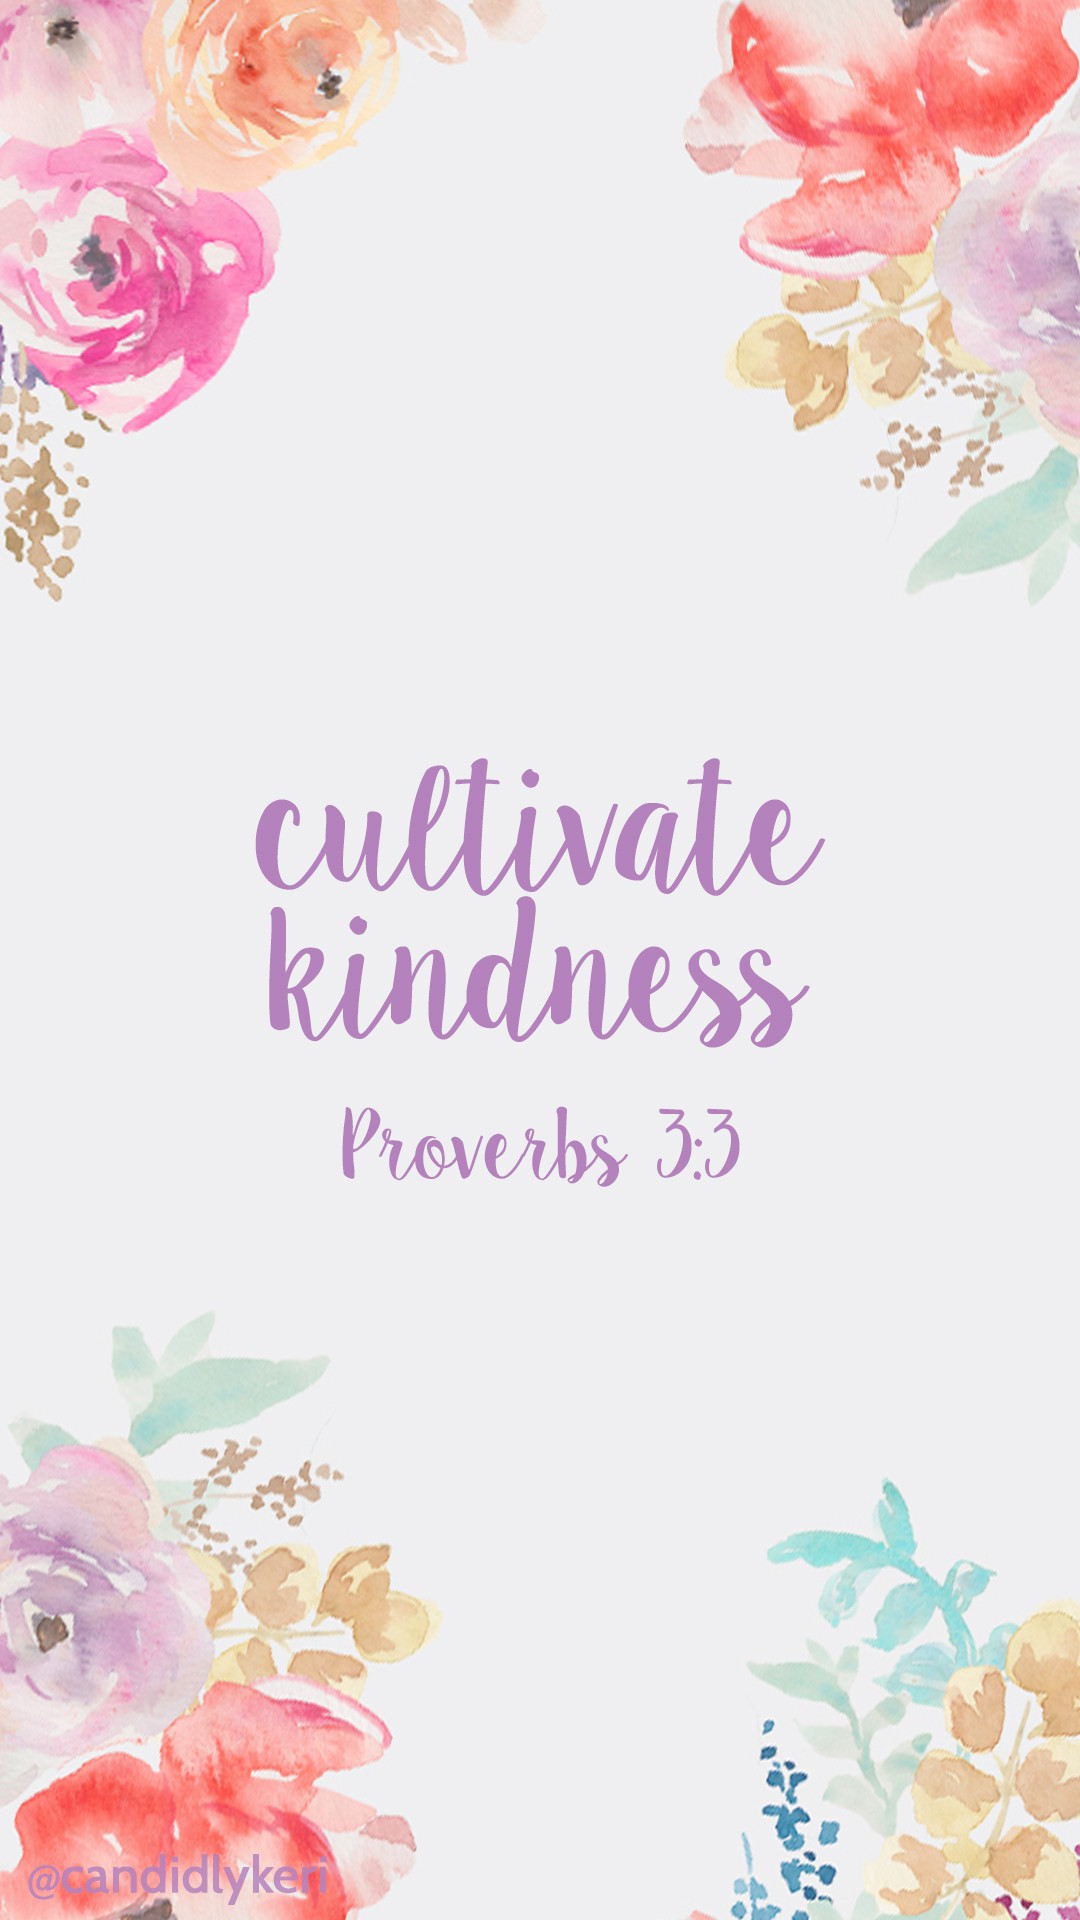 1080x1920 Cultivate kindness pray proverbs quote bible background wallpaper you can…